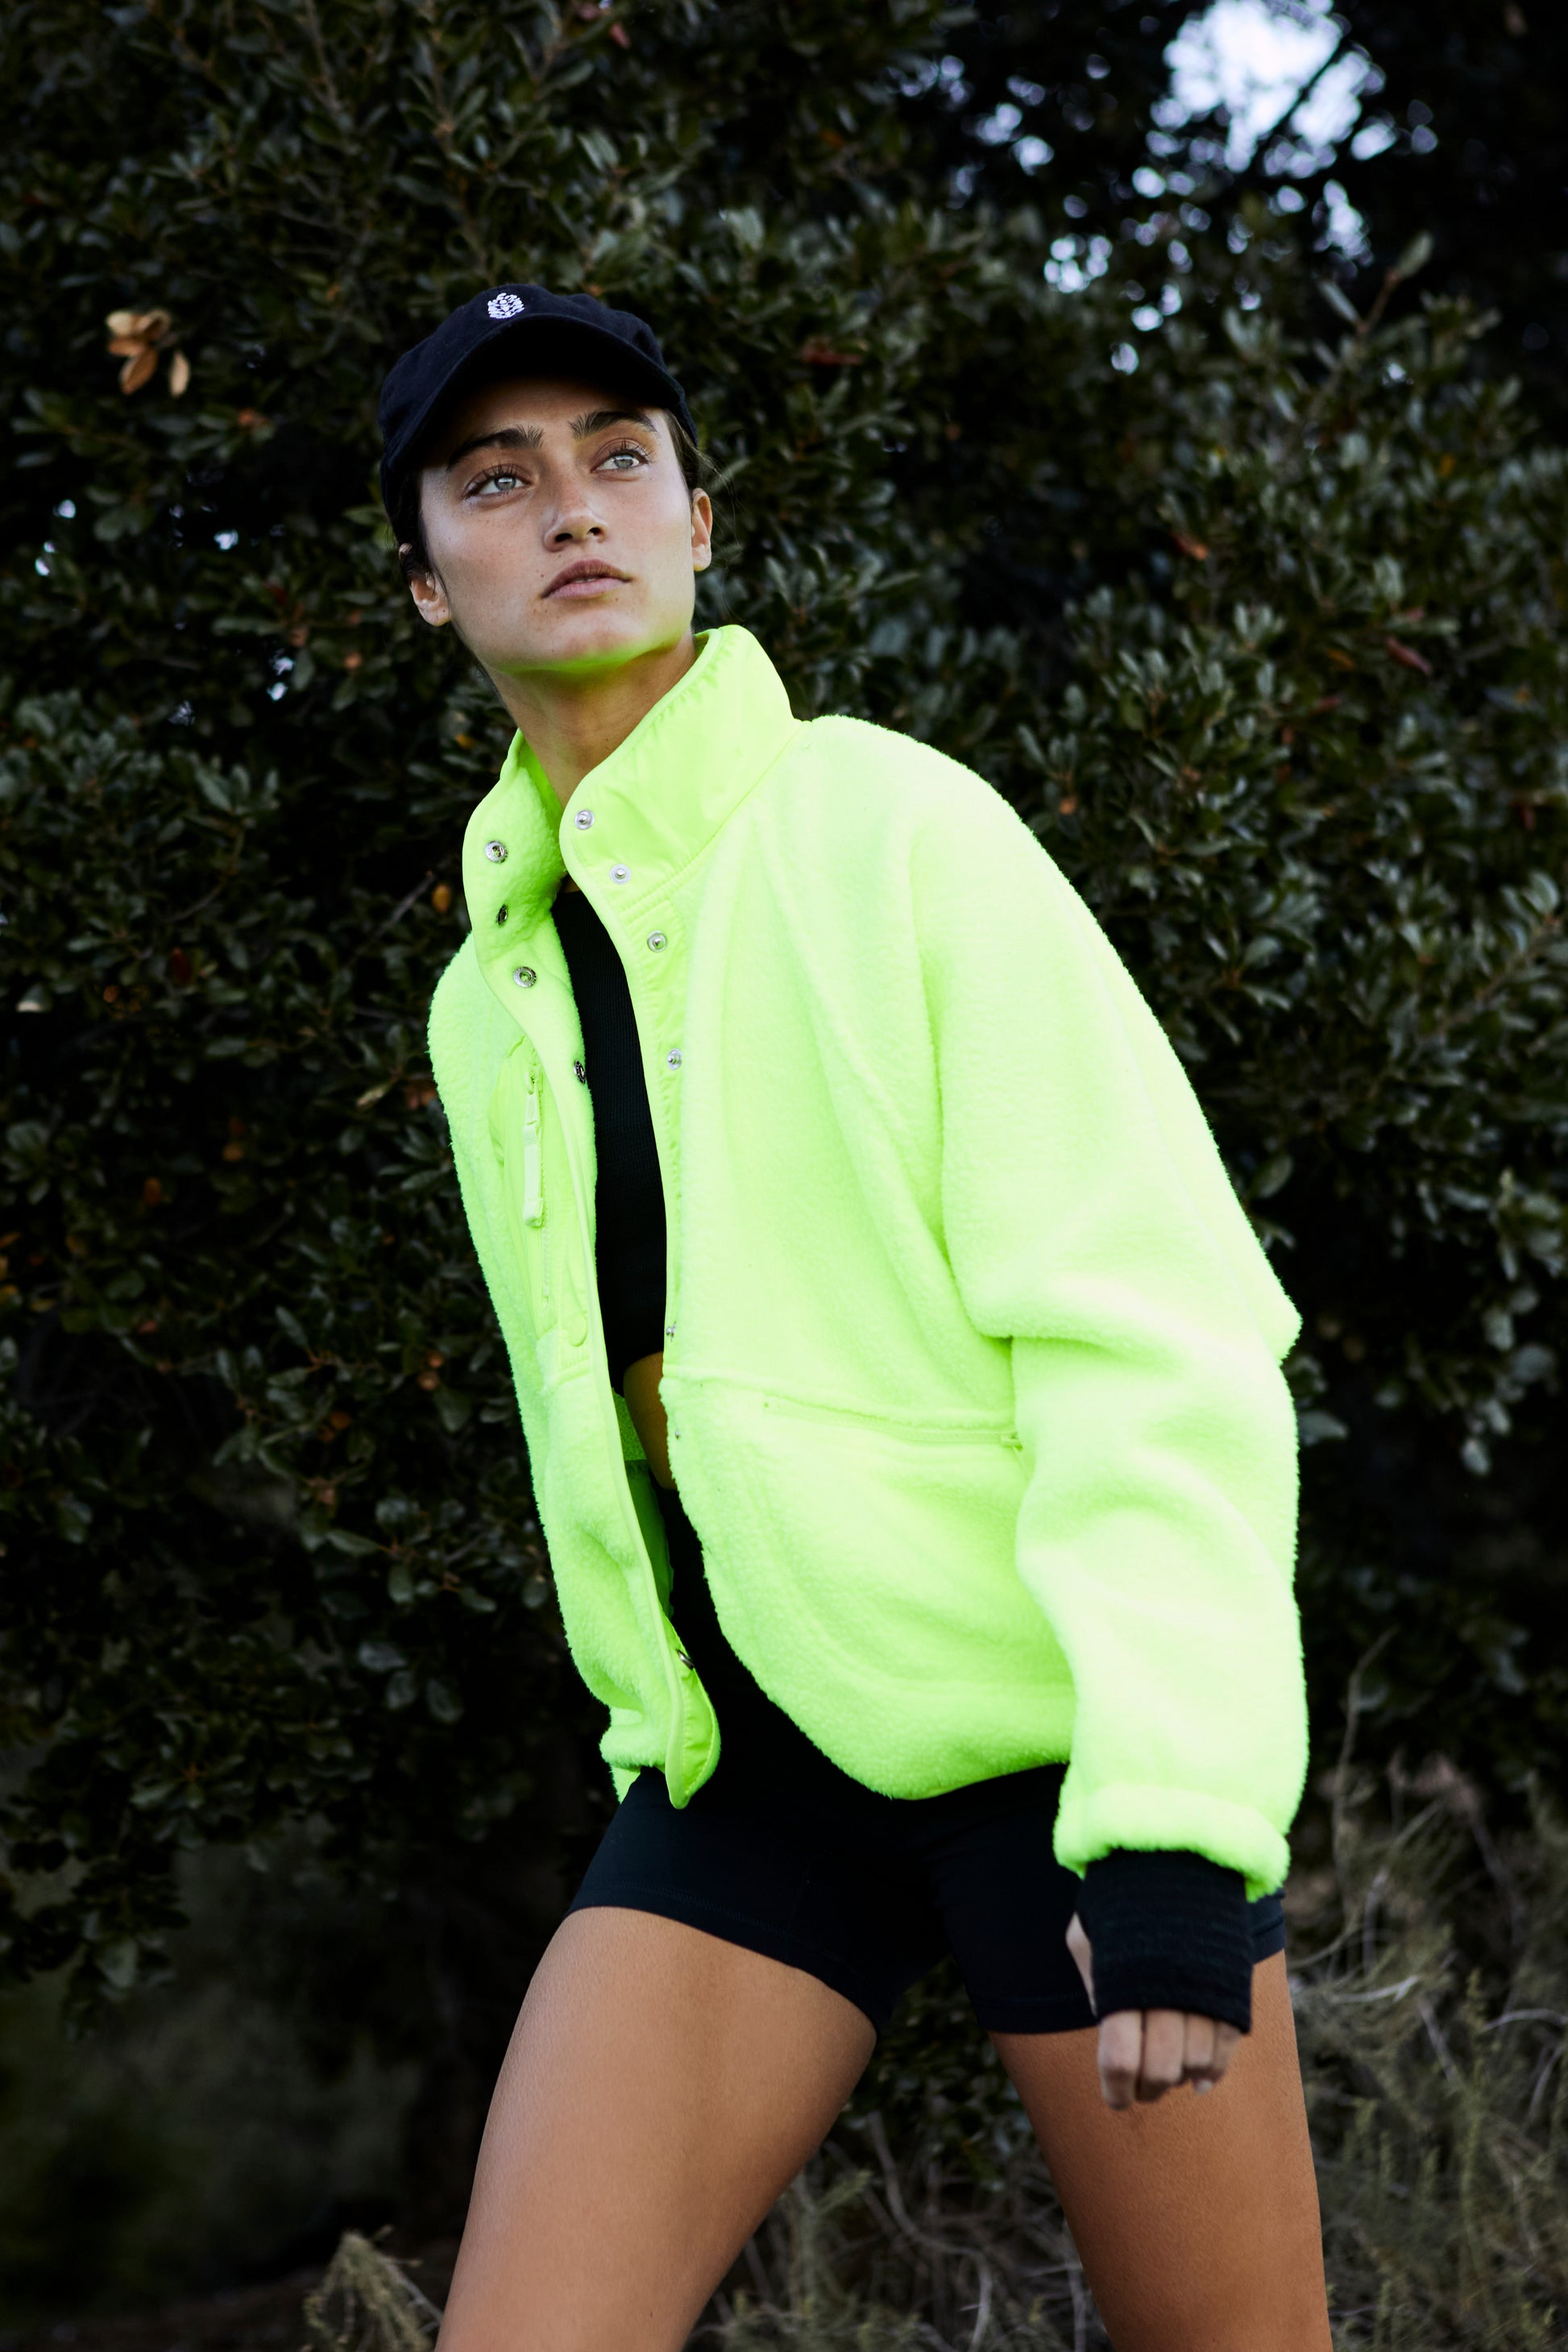 A person wearing a Free People Movement Hit The Slopes Jacket in Highlighter neon green with zippered pockets and a black cap stands outdoors with a thoughtful expression, looking away from the camera.